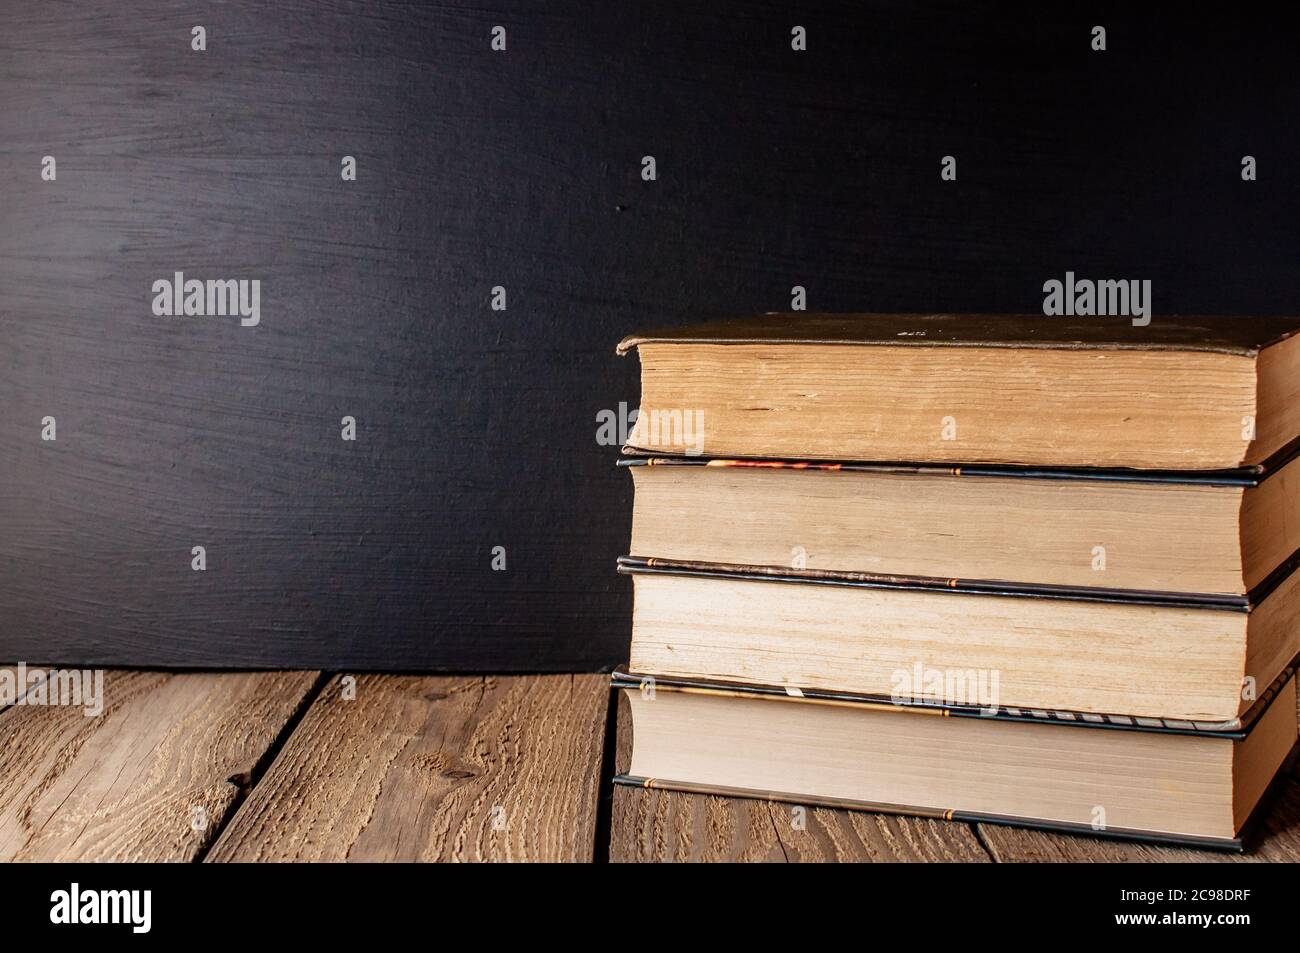 books stacked on a wooden table in a rustic style on the background a school blackboard. The concept of welcome back to school. copy space Stock Photo